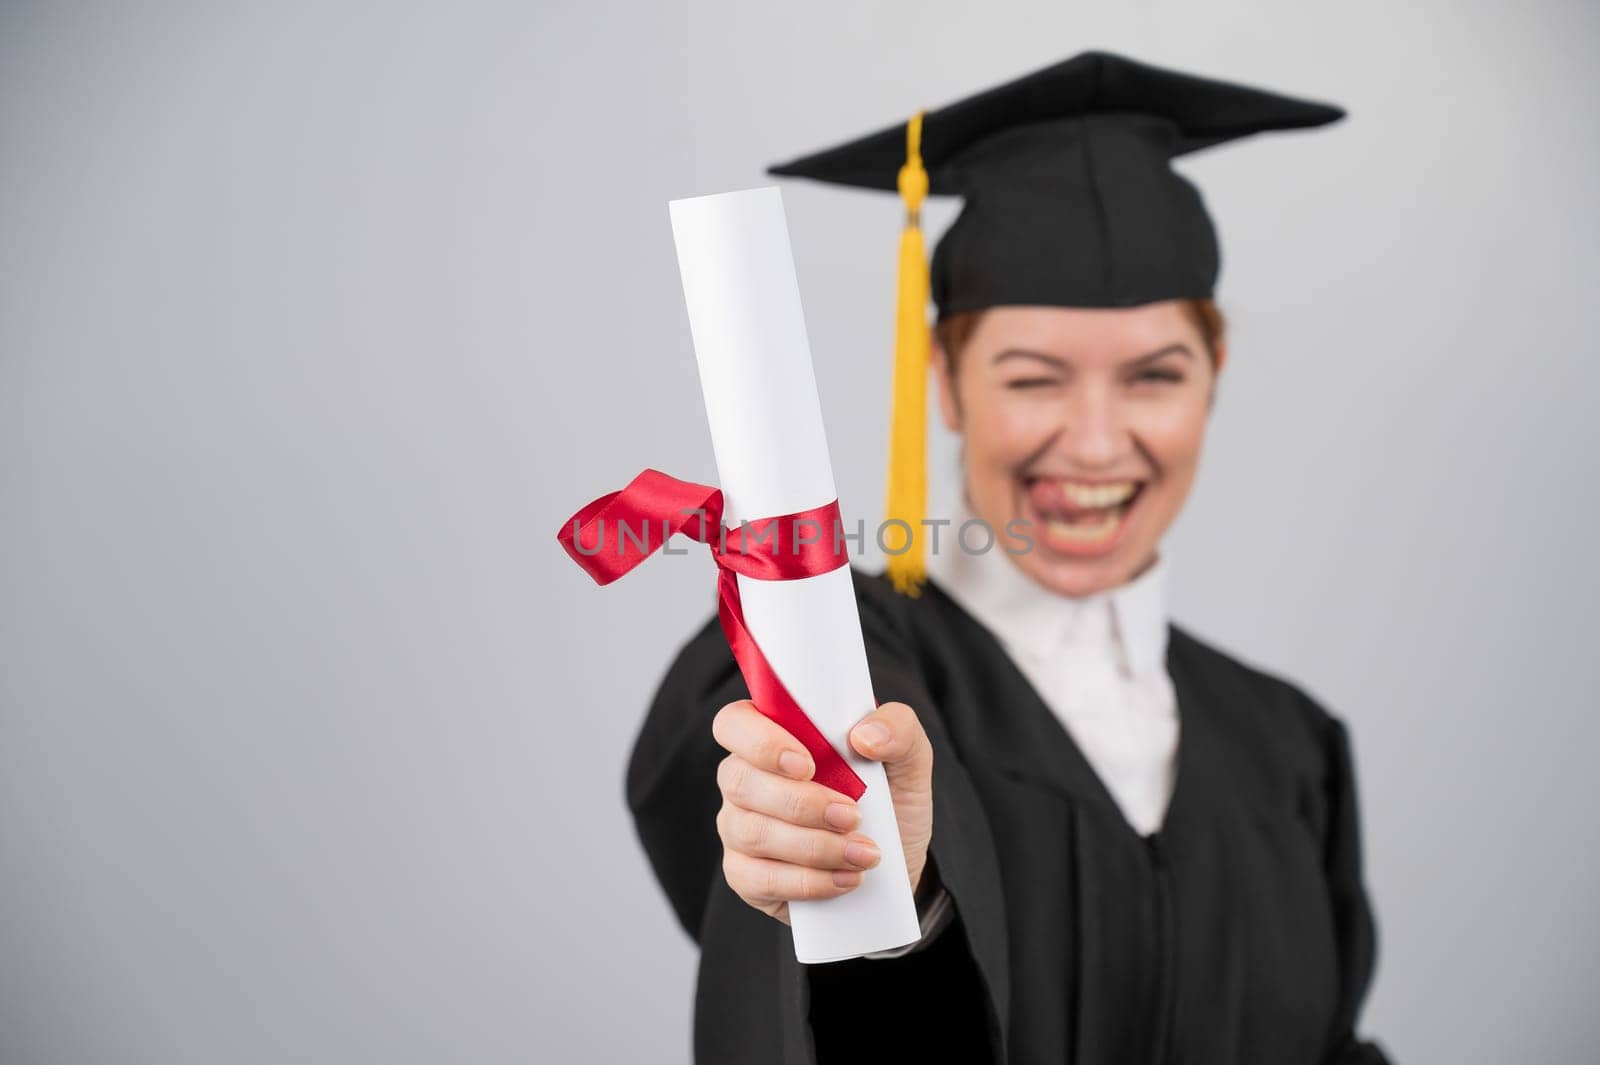 Emotional woman in graduate gown holding diploma in foreground